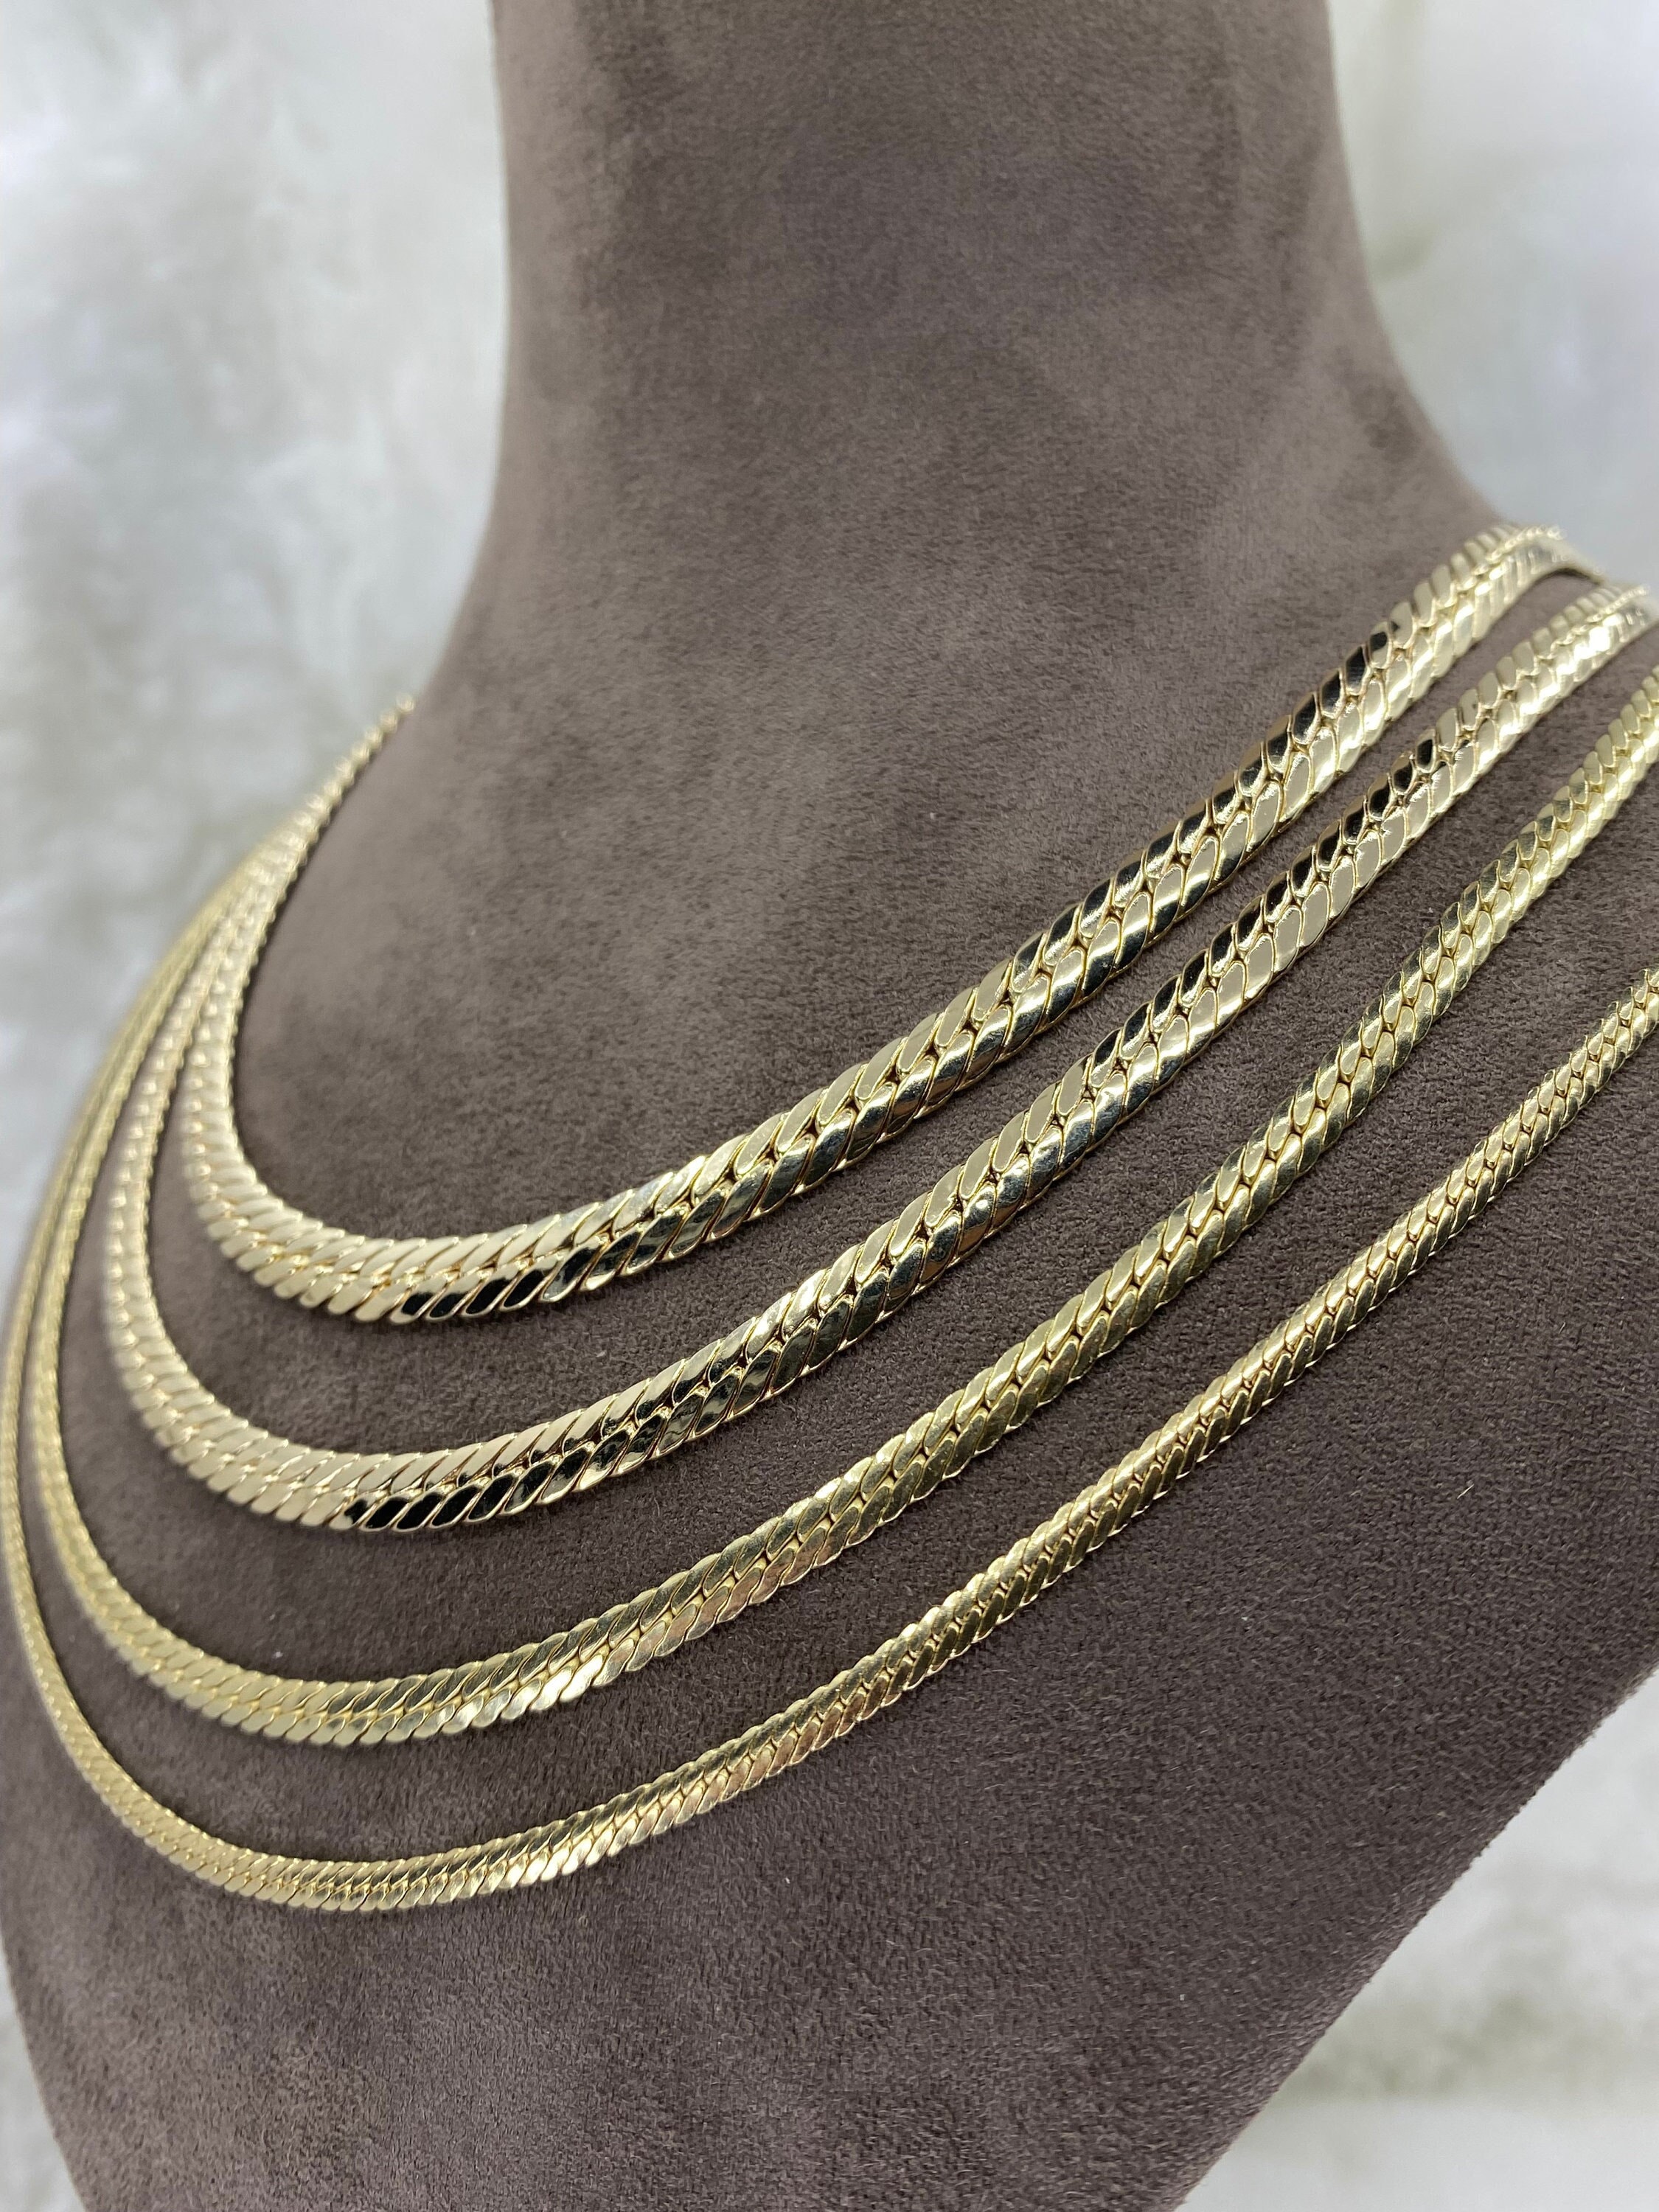 Macrame Choker Necklace Tight Necklace Made of Thread and Brass